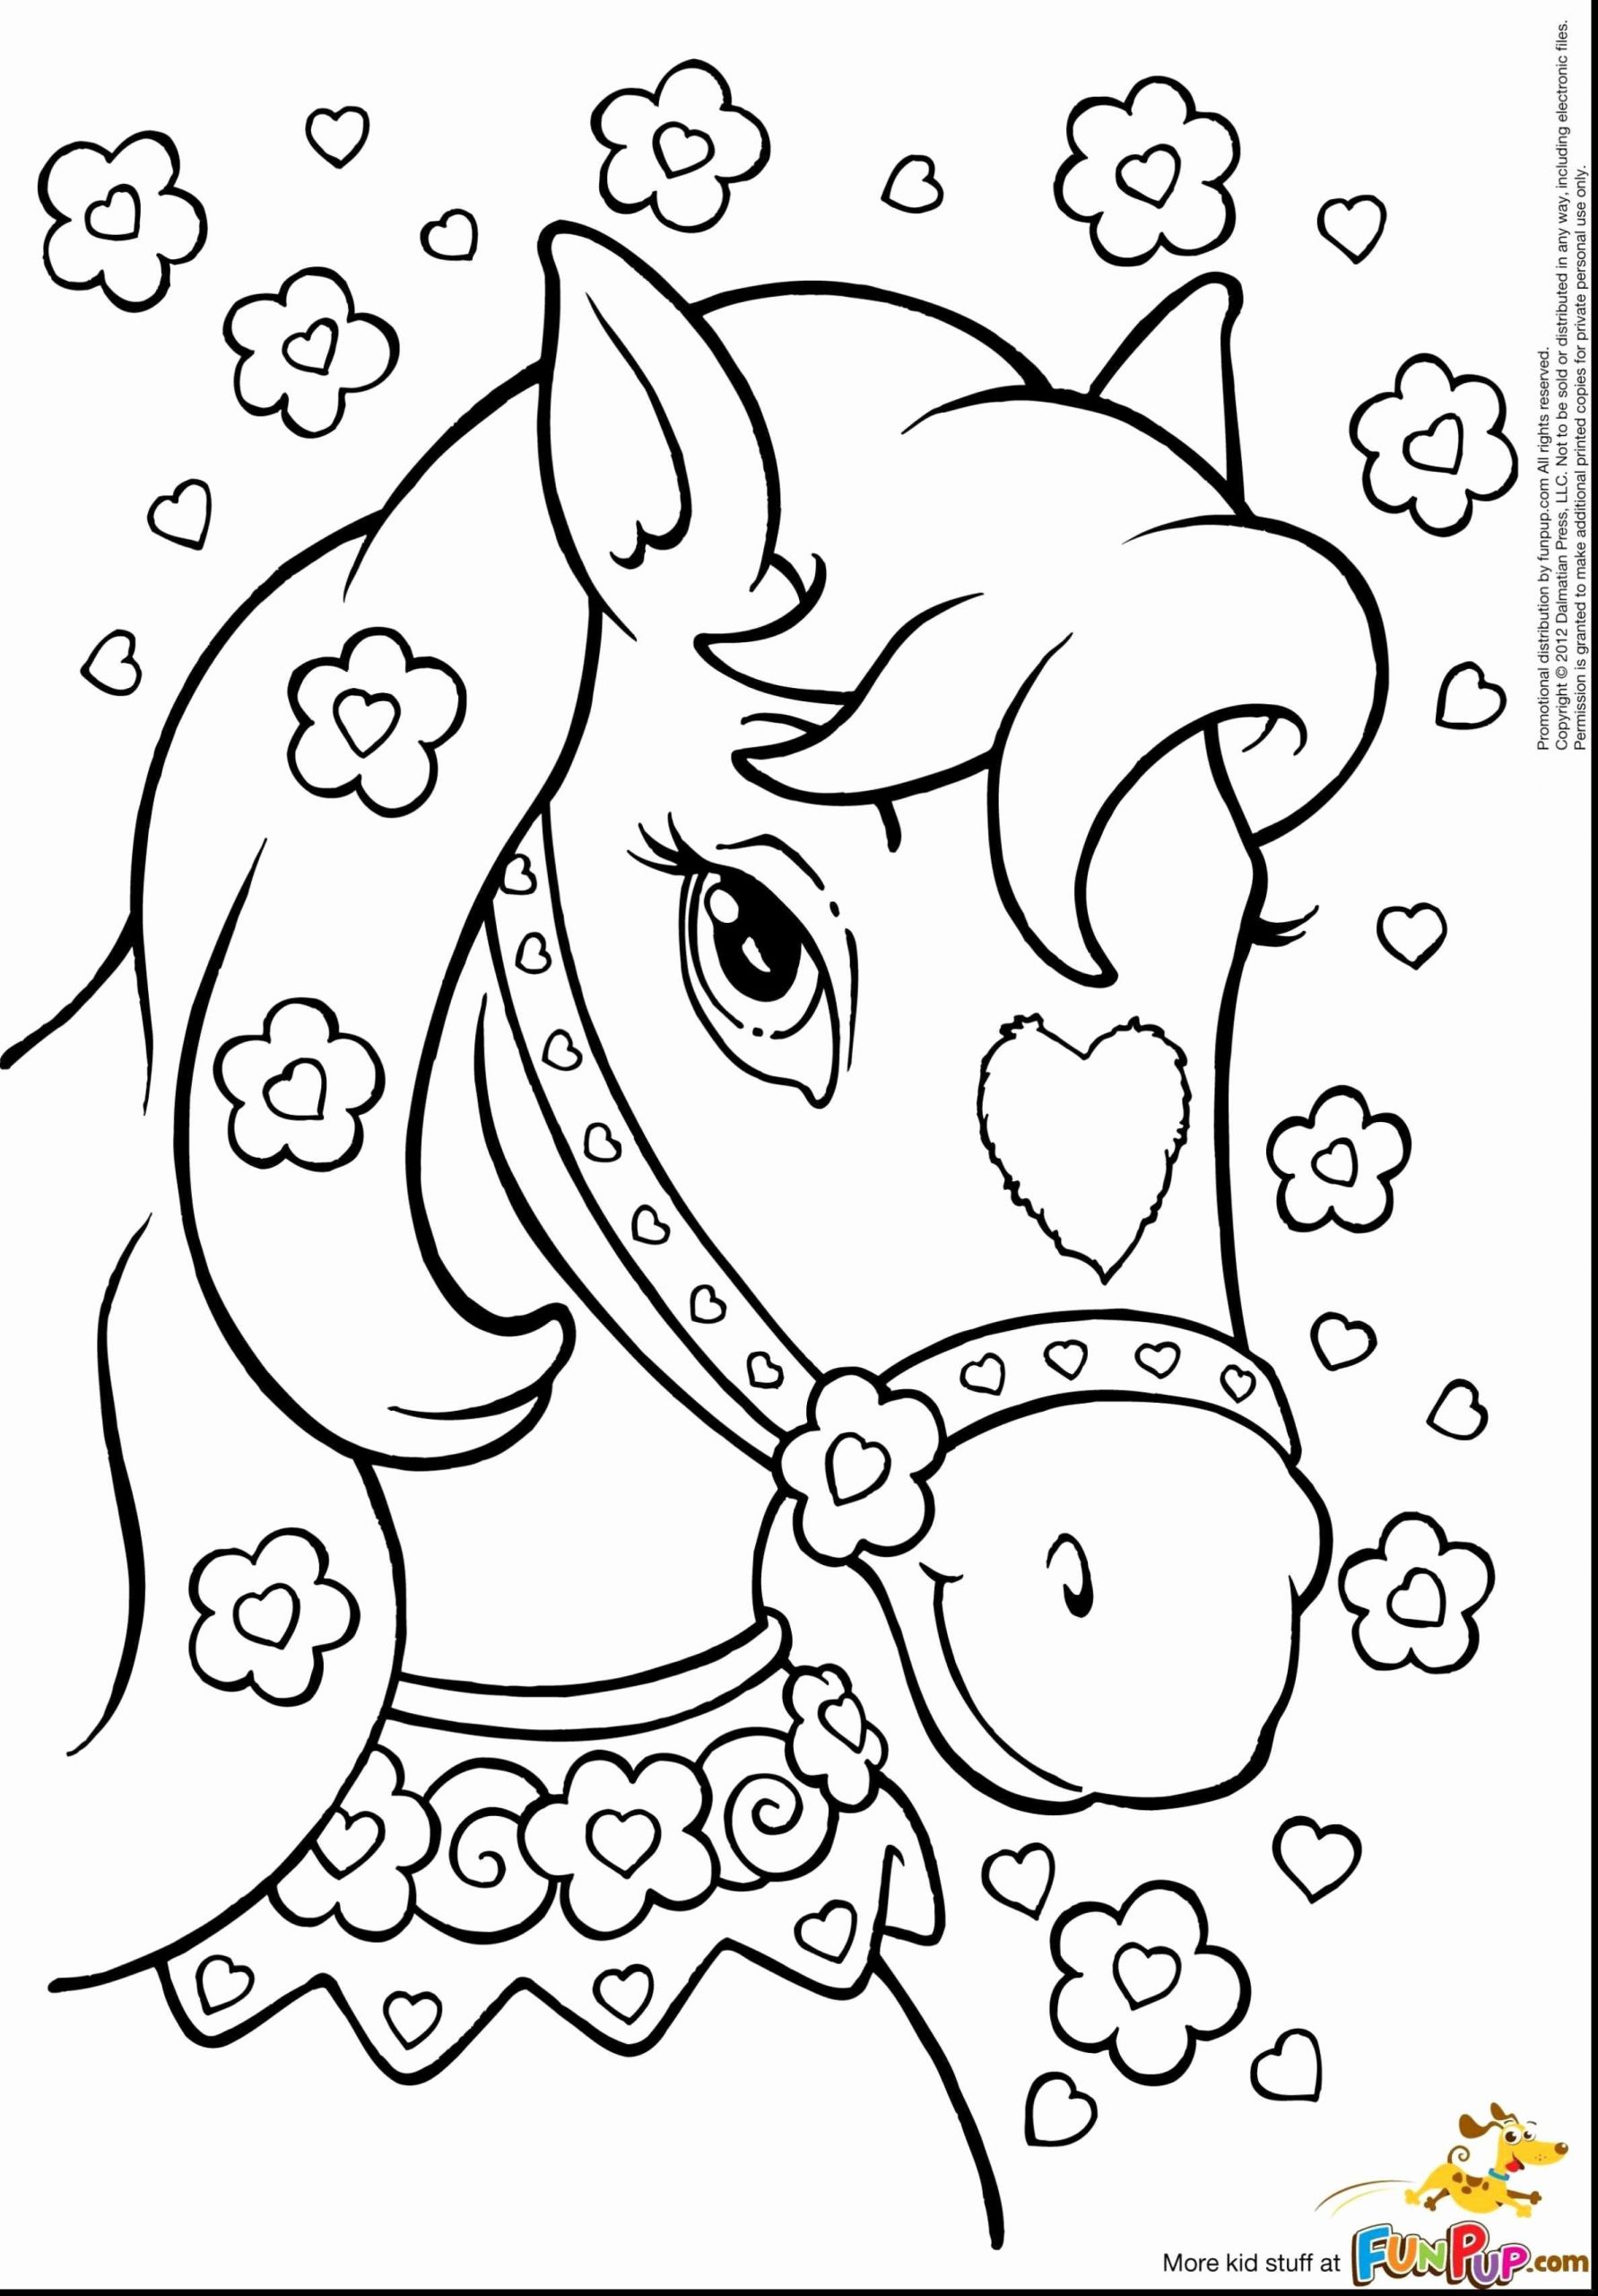 coloring pages : Cool Coloring Sheets For Kids Fresh Coloring African  Animals In 2020 Cool Coloring Sheets for Kids ~ affiliateprogrambook.com